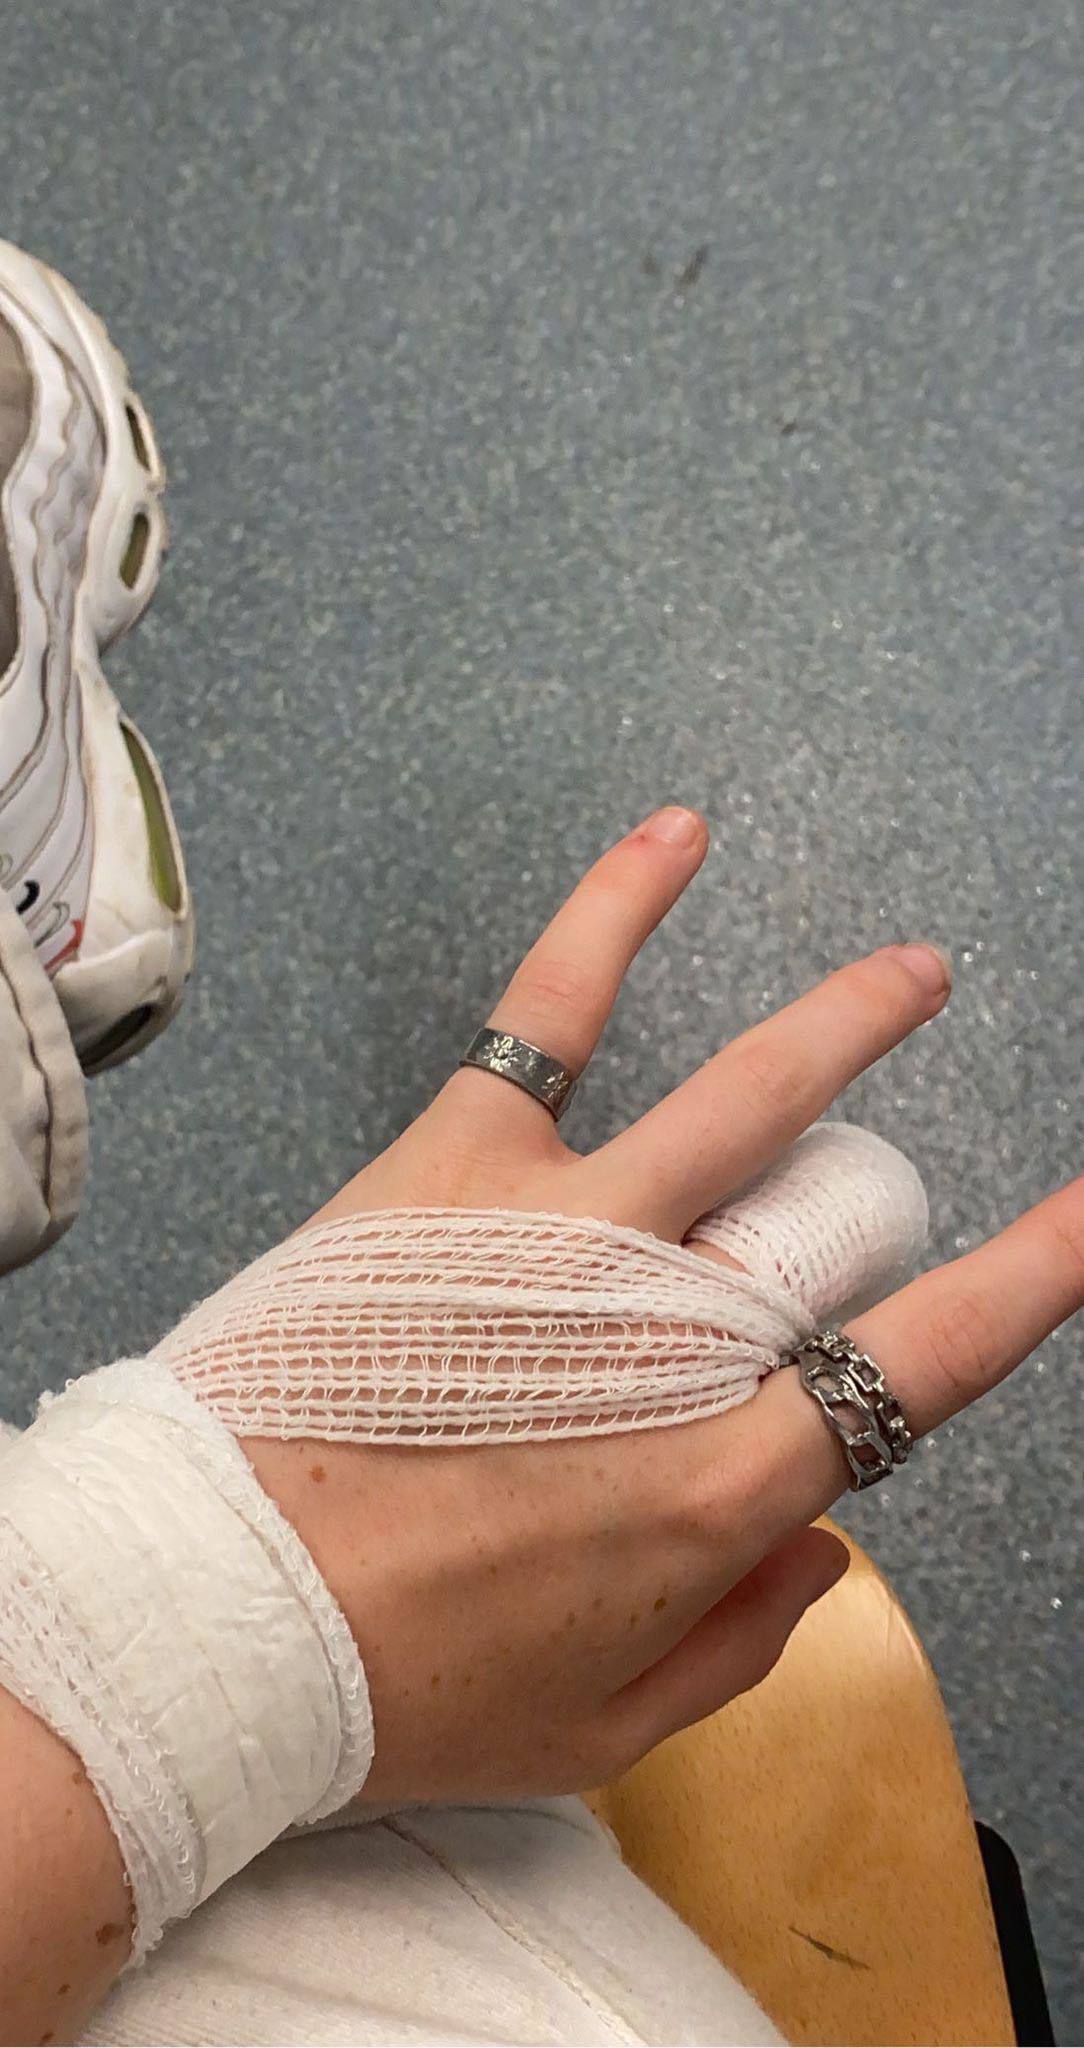 Summer Gibbs seen escorted by Reading Festival staff after injuring her finger